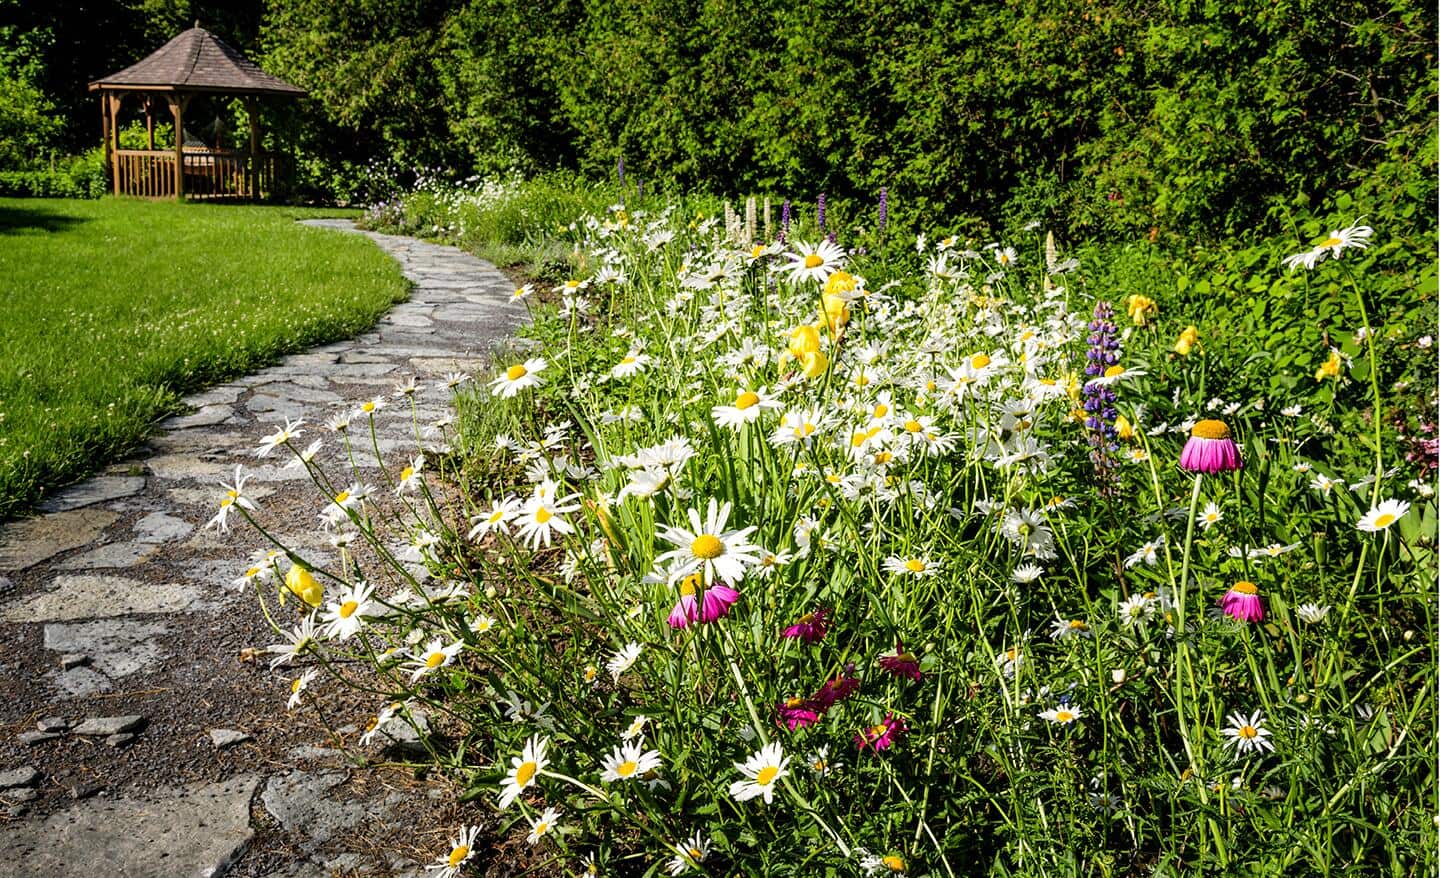 Daisies and wildflowers blooming beside a garden path